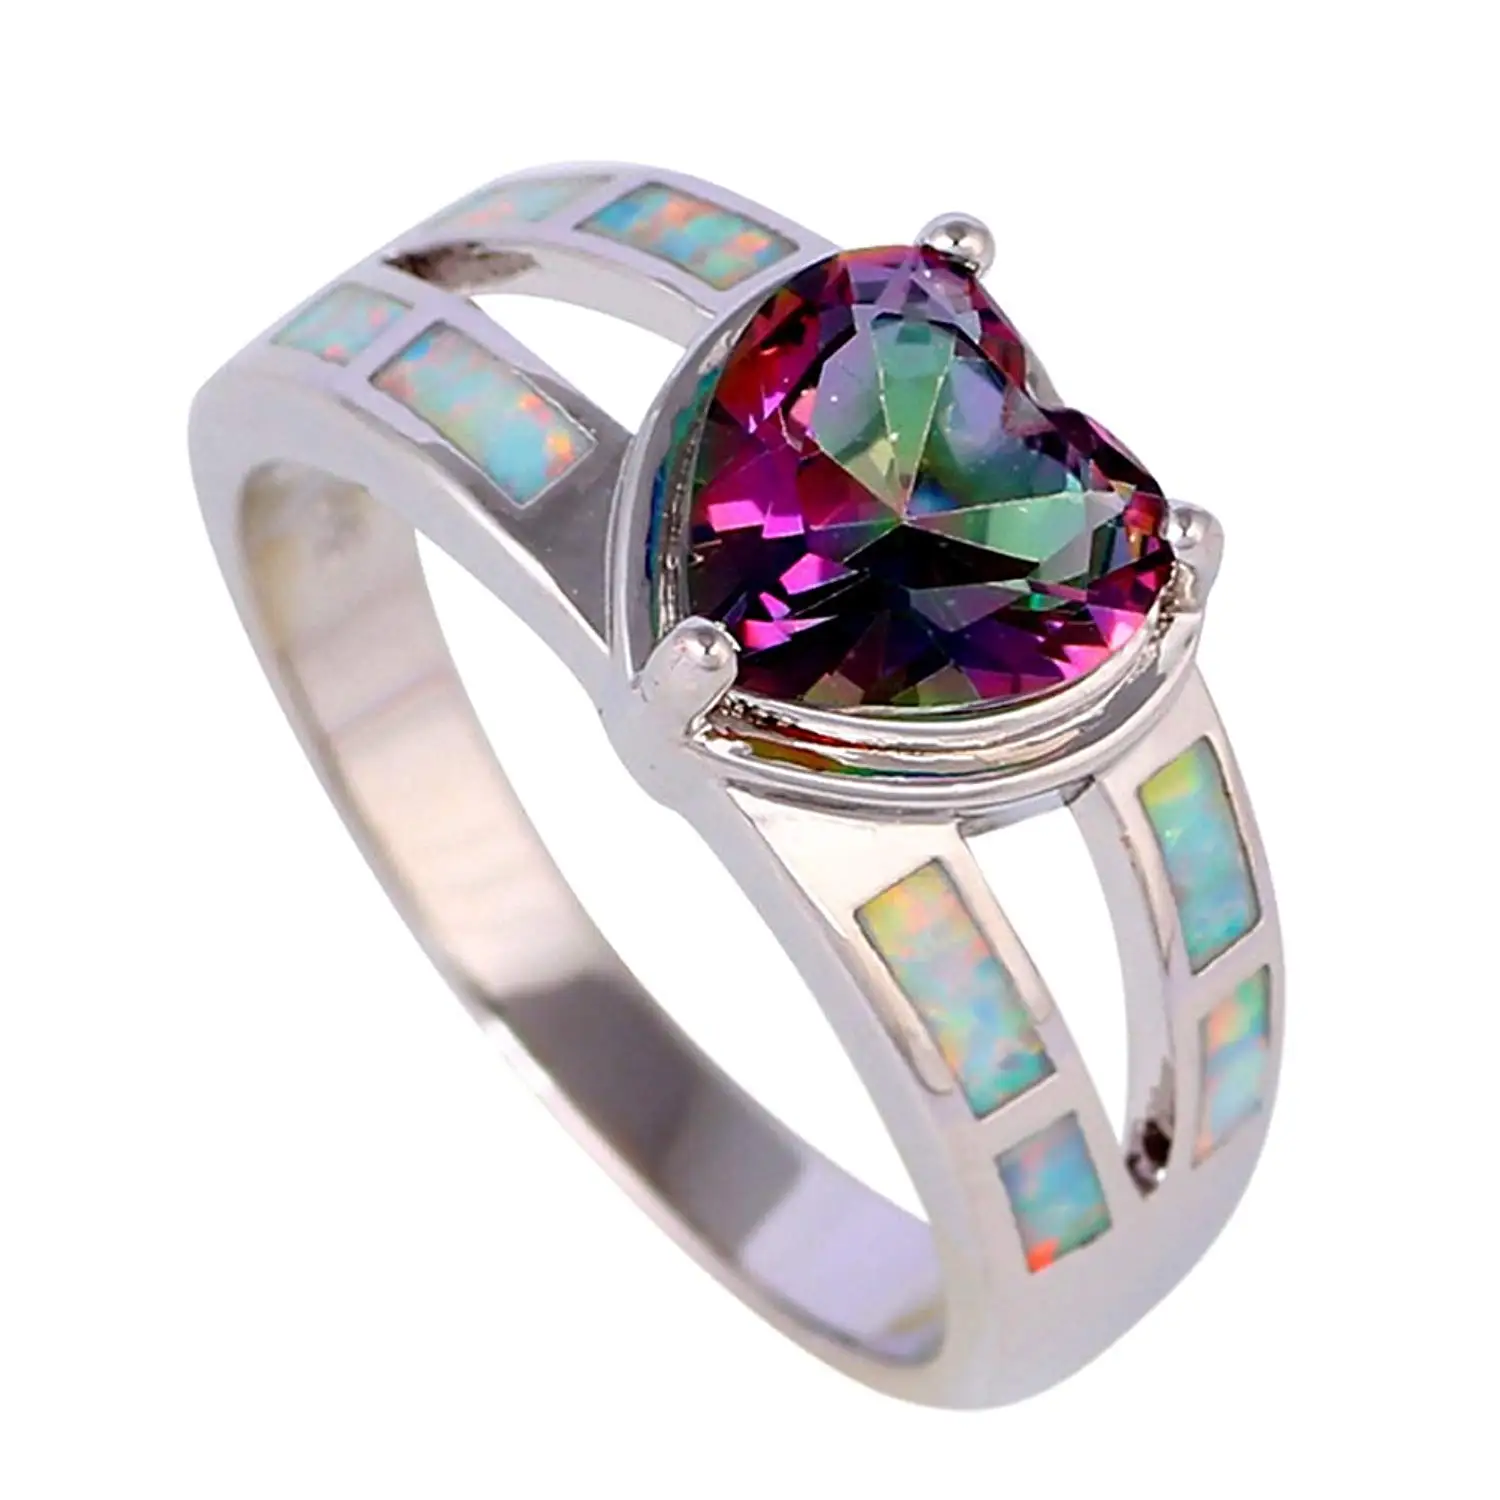 Cheap Opal Heart Rings, find Opal Heart Rings deals on line at Alibaba.com